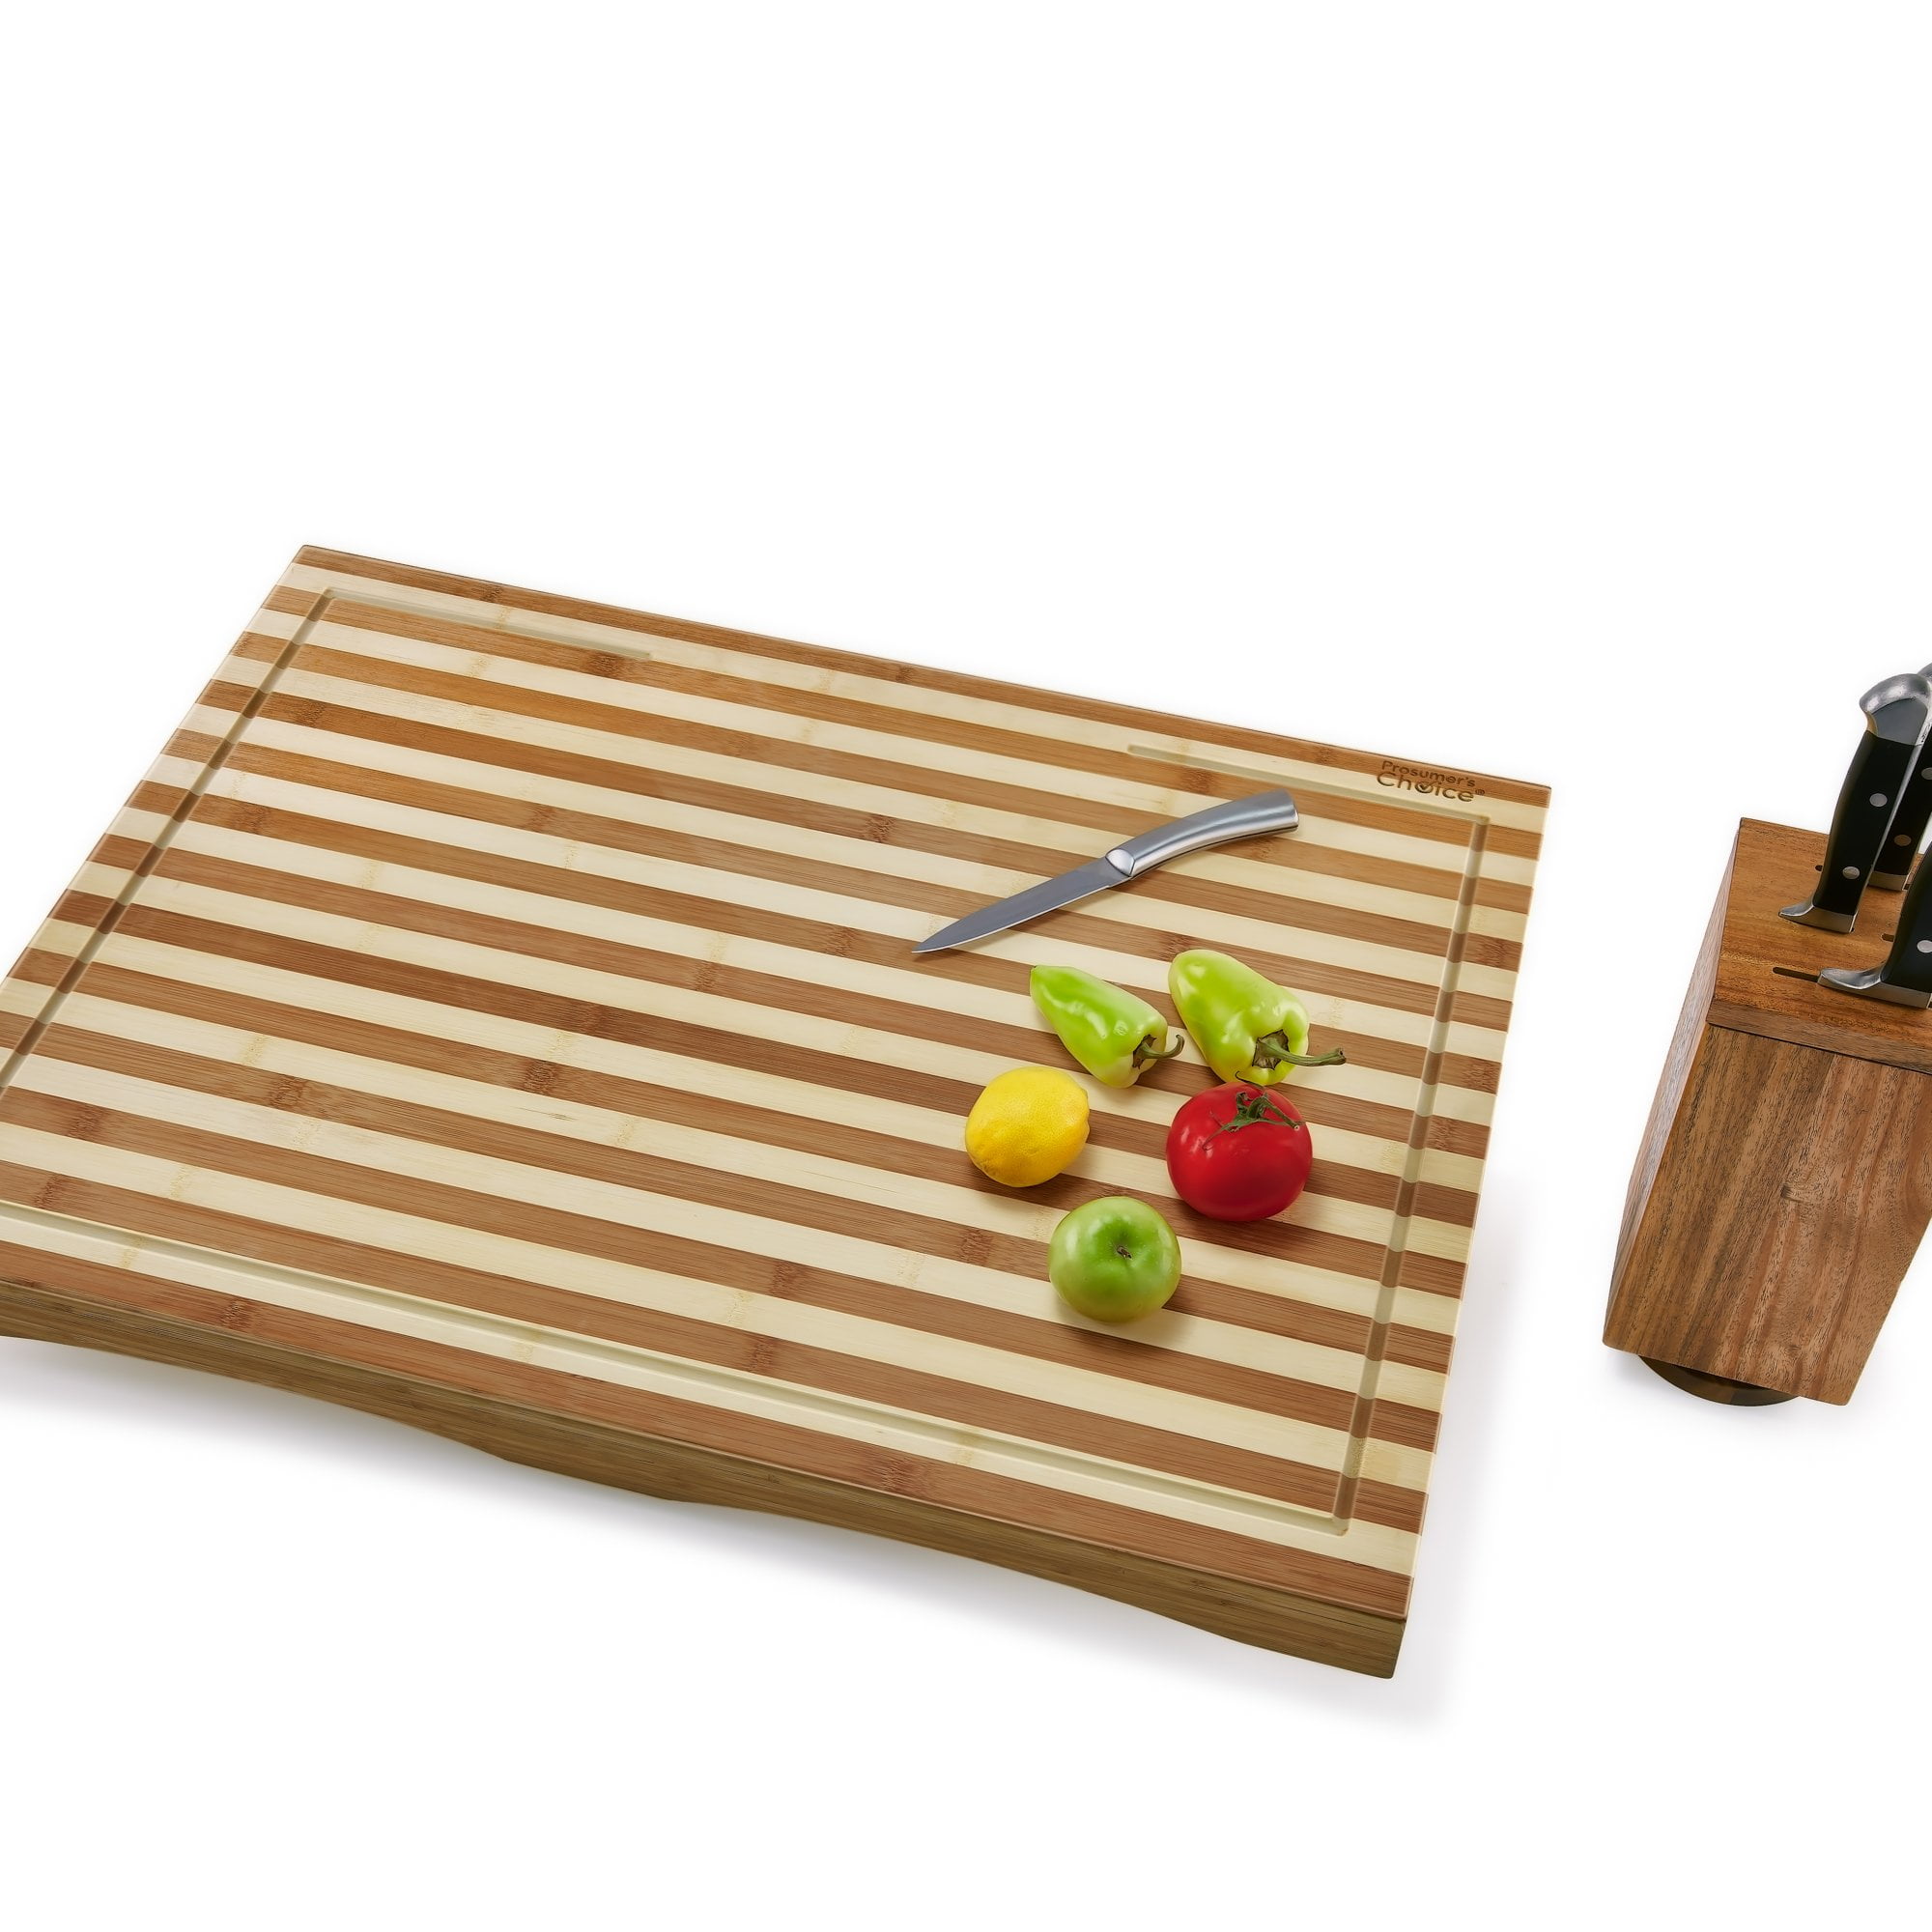 Prosumer's Choice 15.74 x 10.62 Bamboo Chopping Board with Food Container  Organizer, Wood Colour